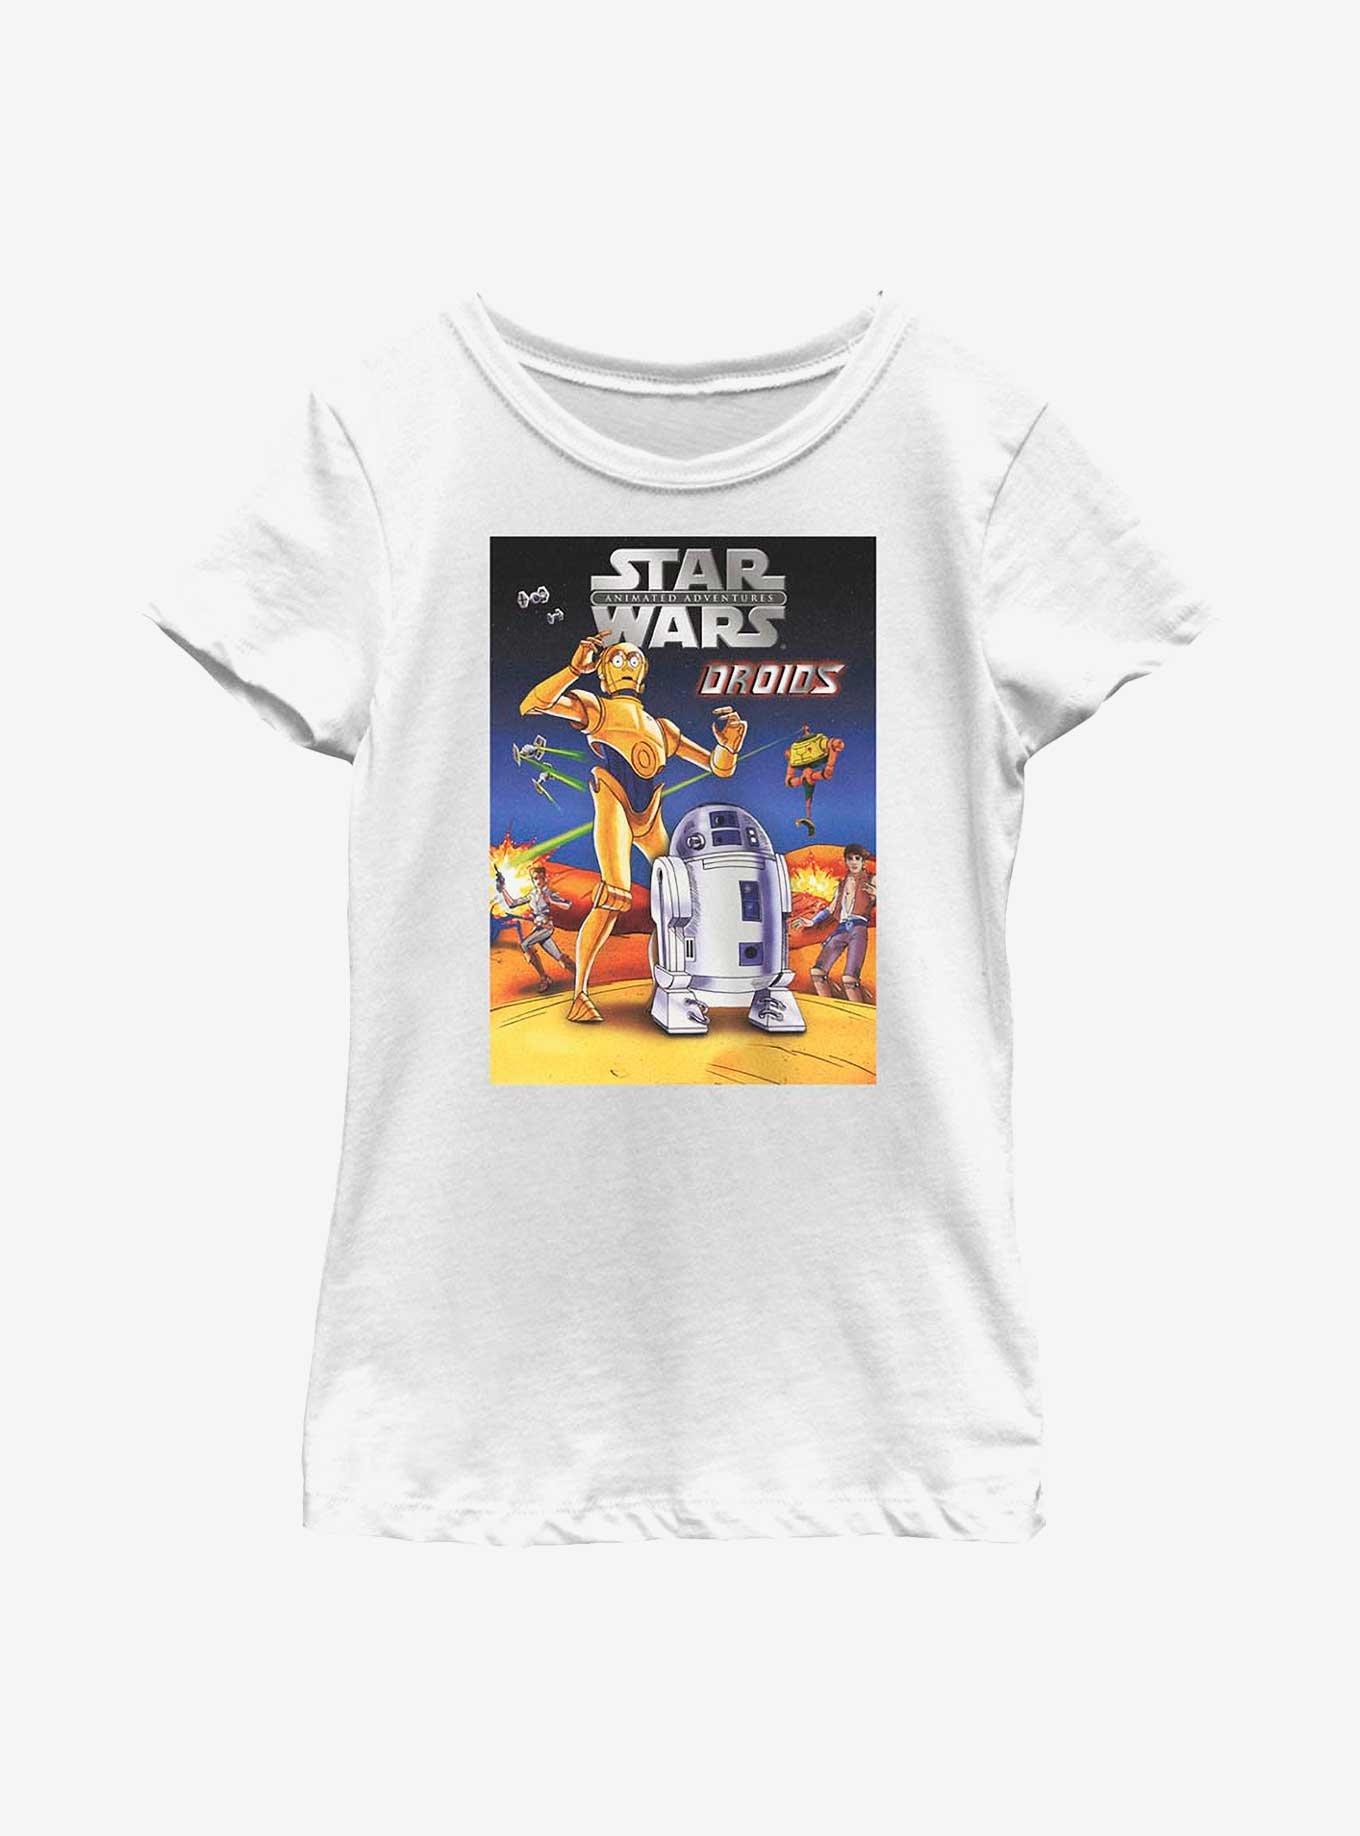 Star Wars Animated Droids Youth Girls T-Shirt, WHITE, hi-res